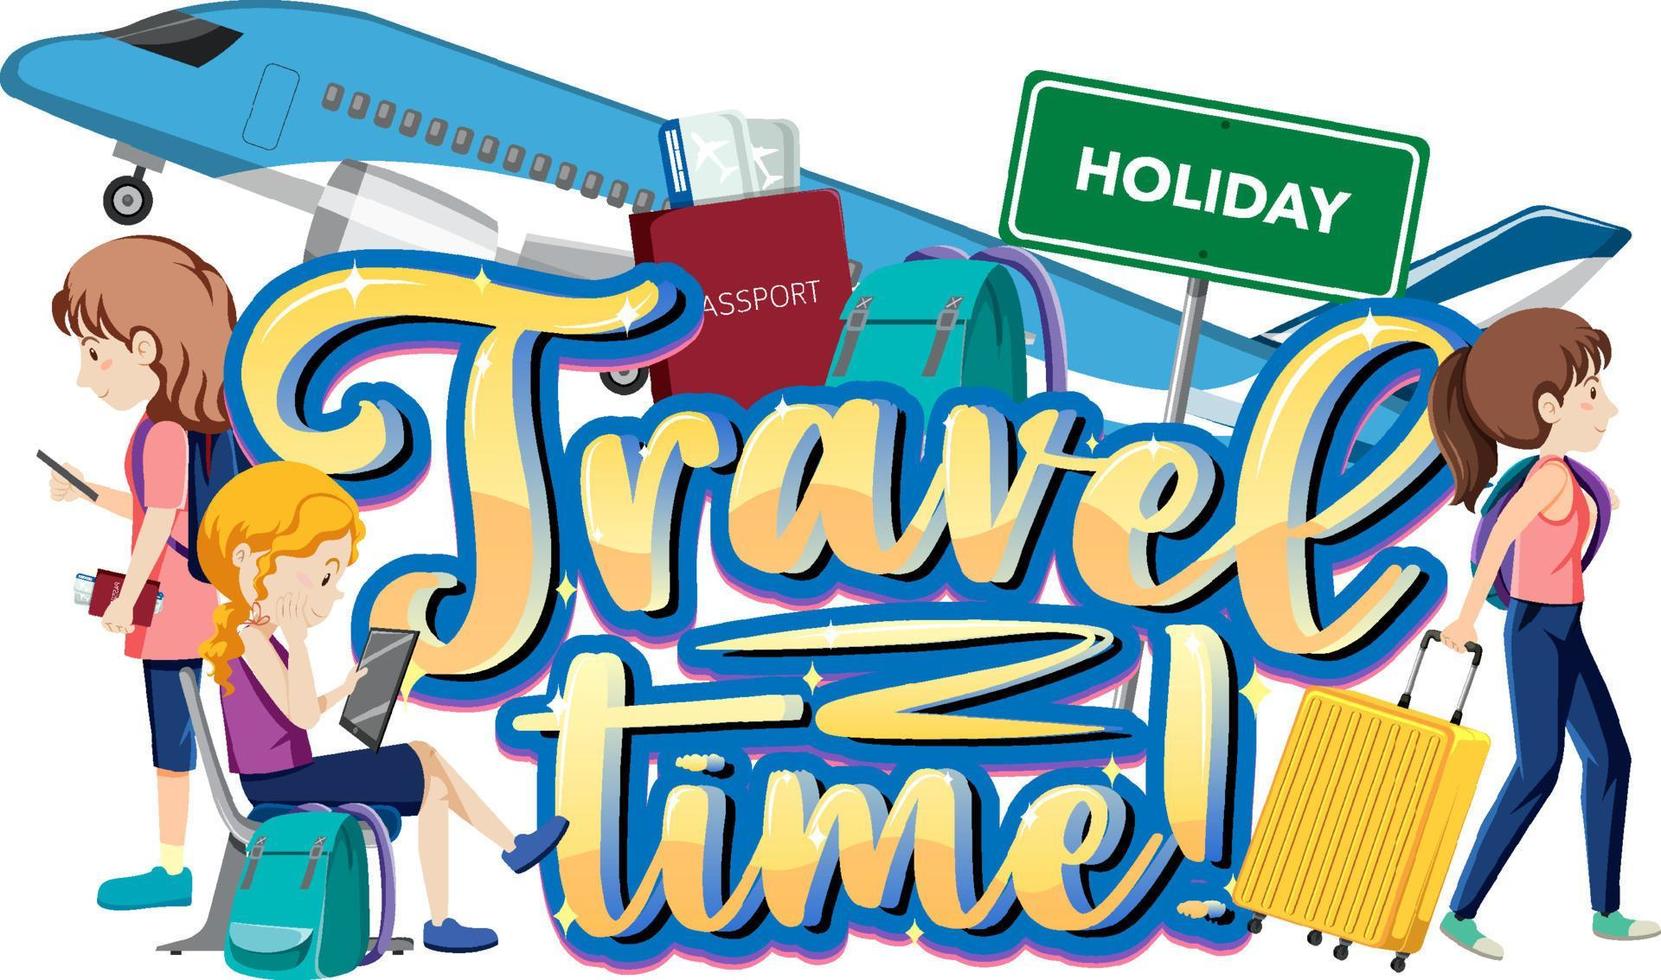 Travel Time typography design with people and travelling objects vector